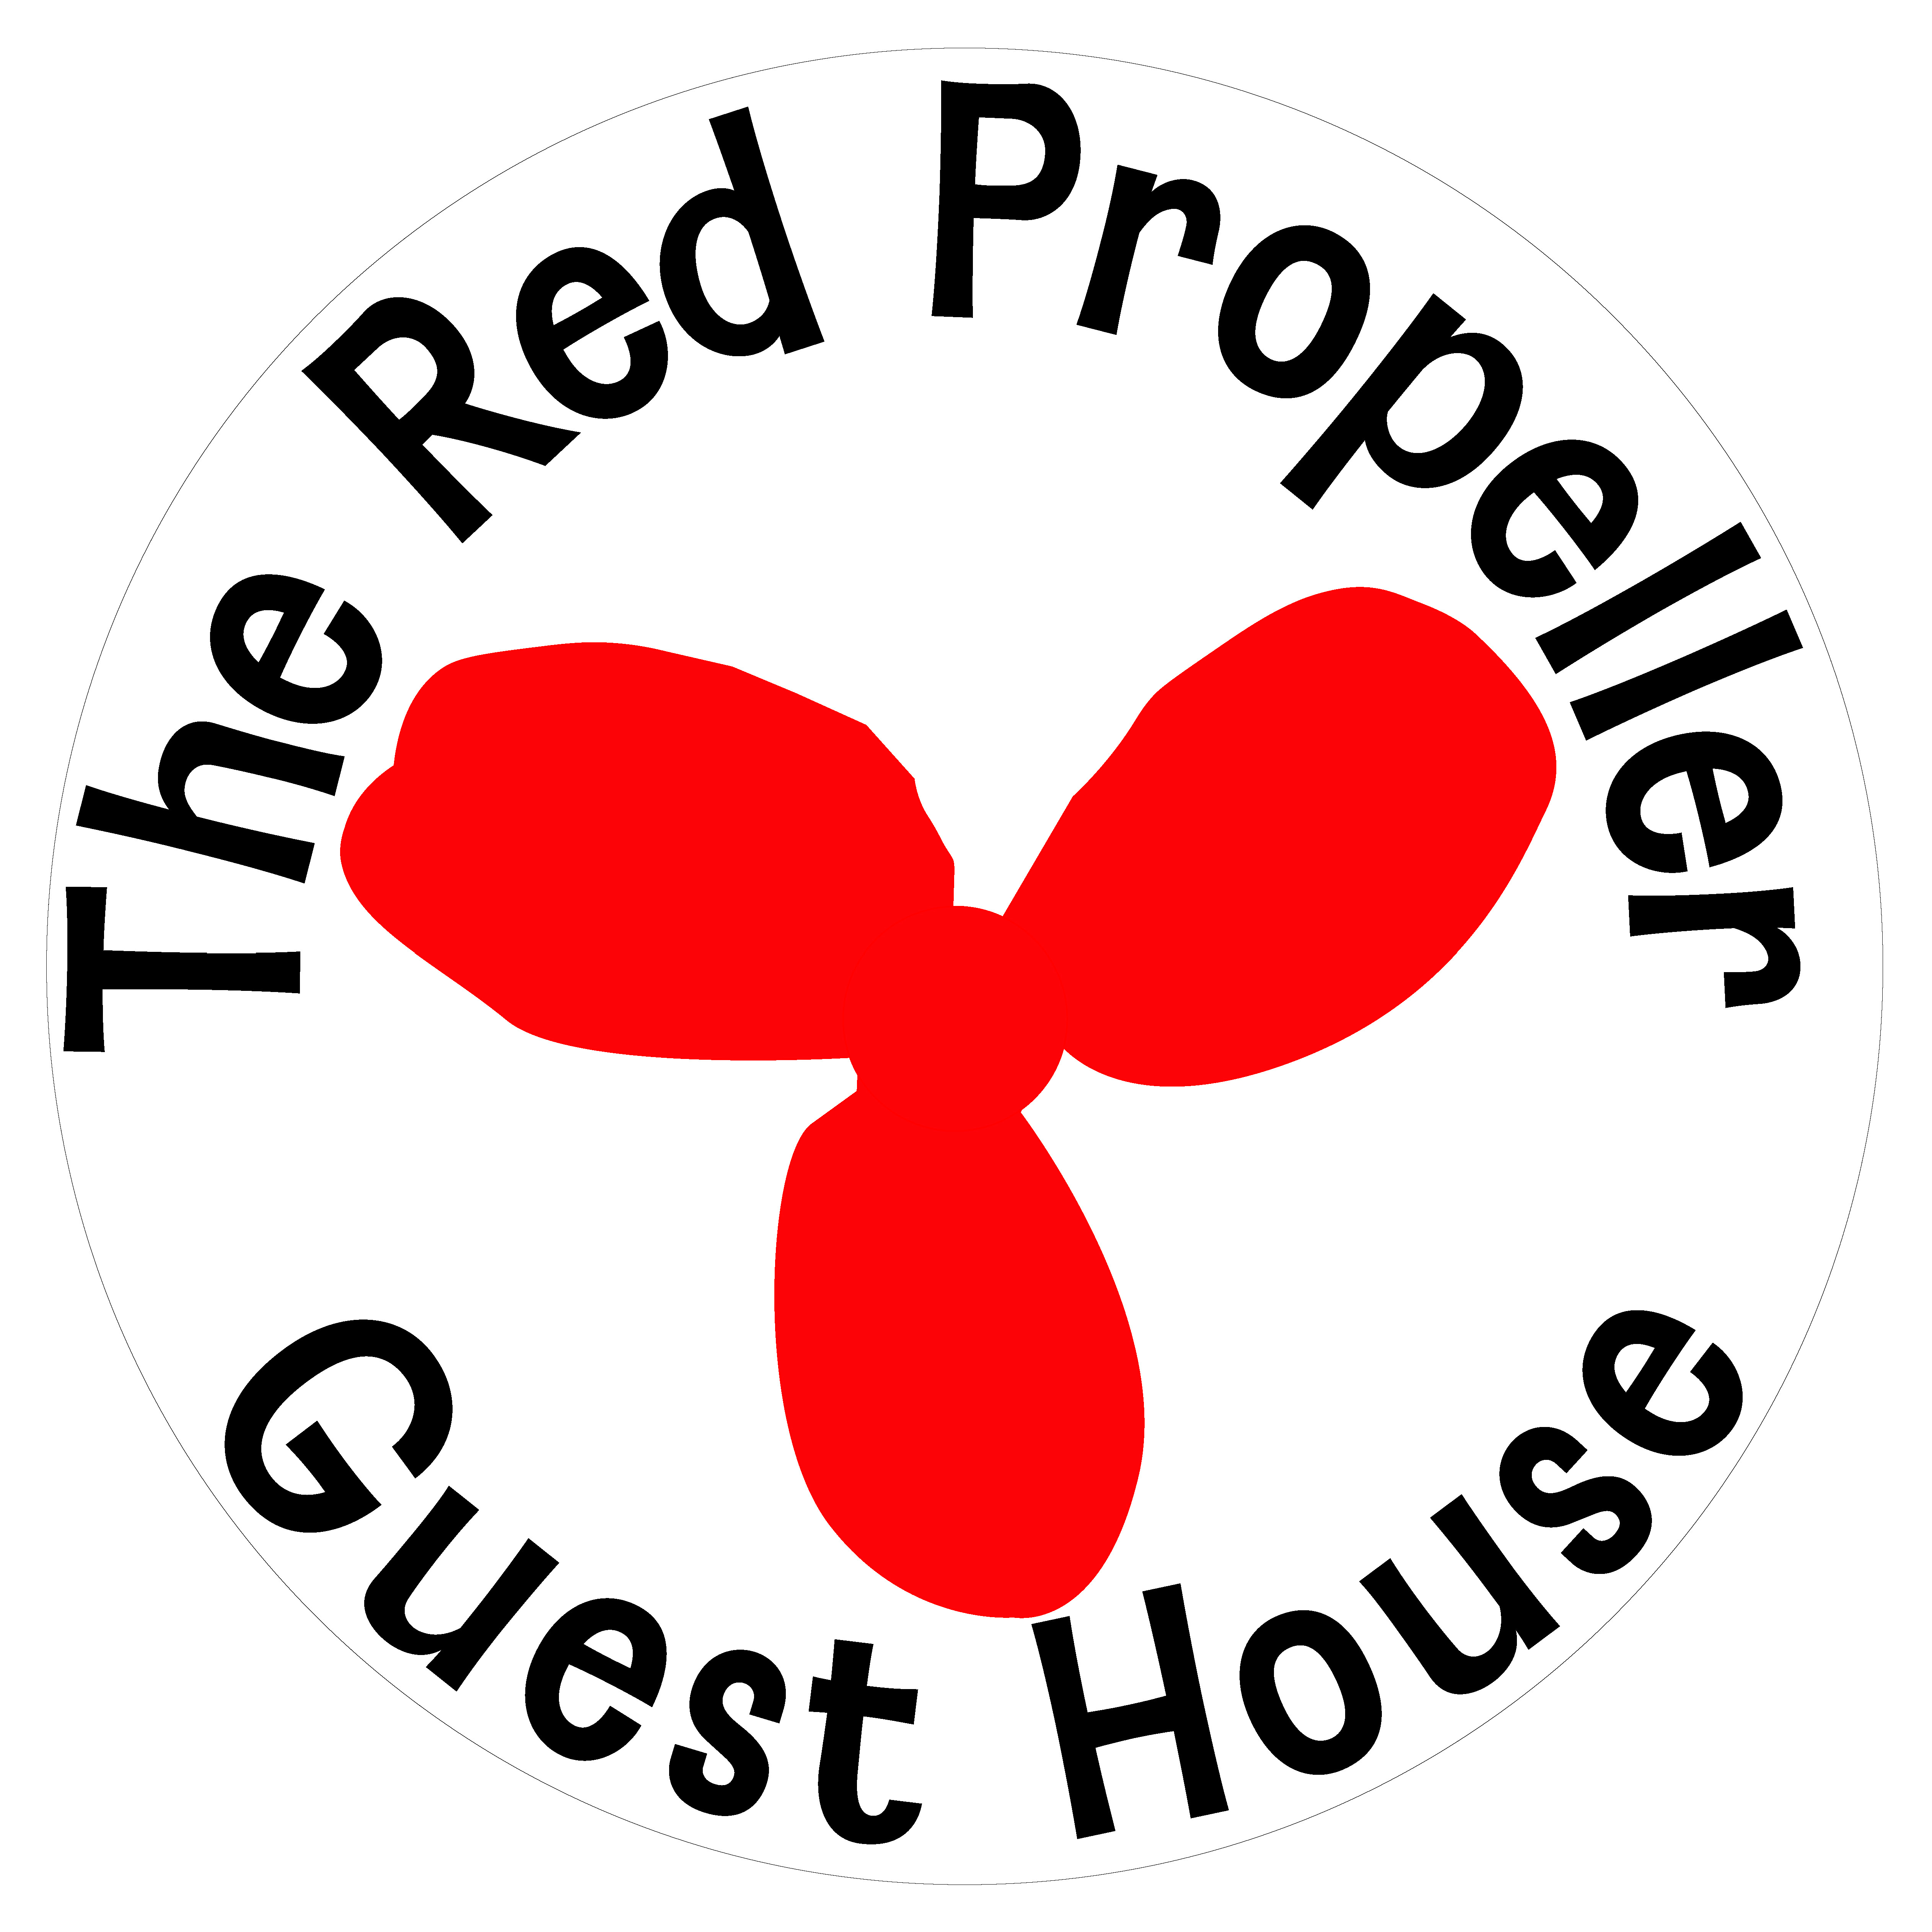 THE RED PROPELLER GUEST HOUSE